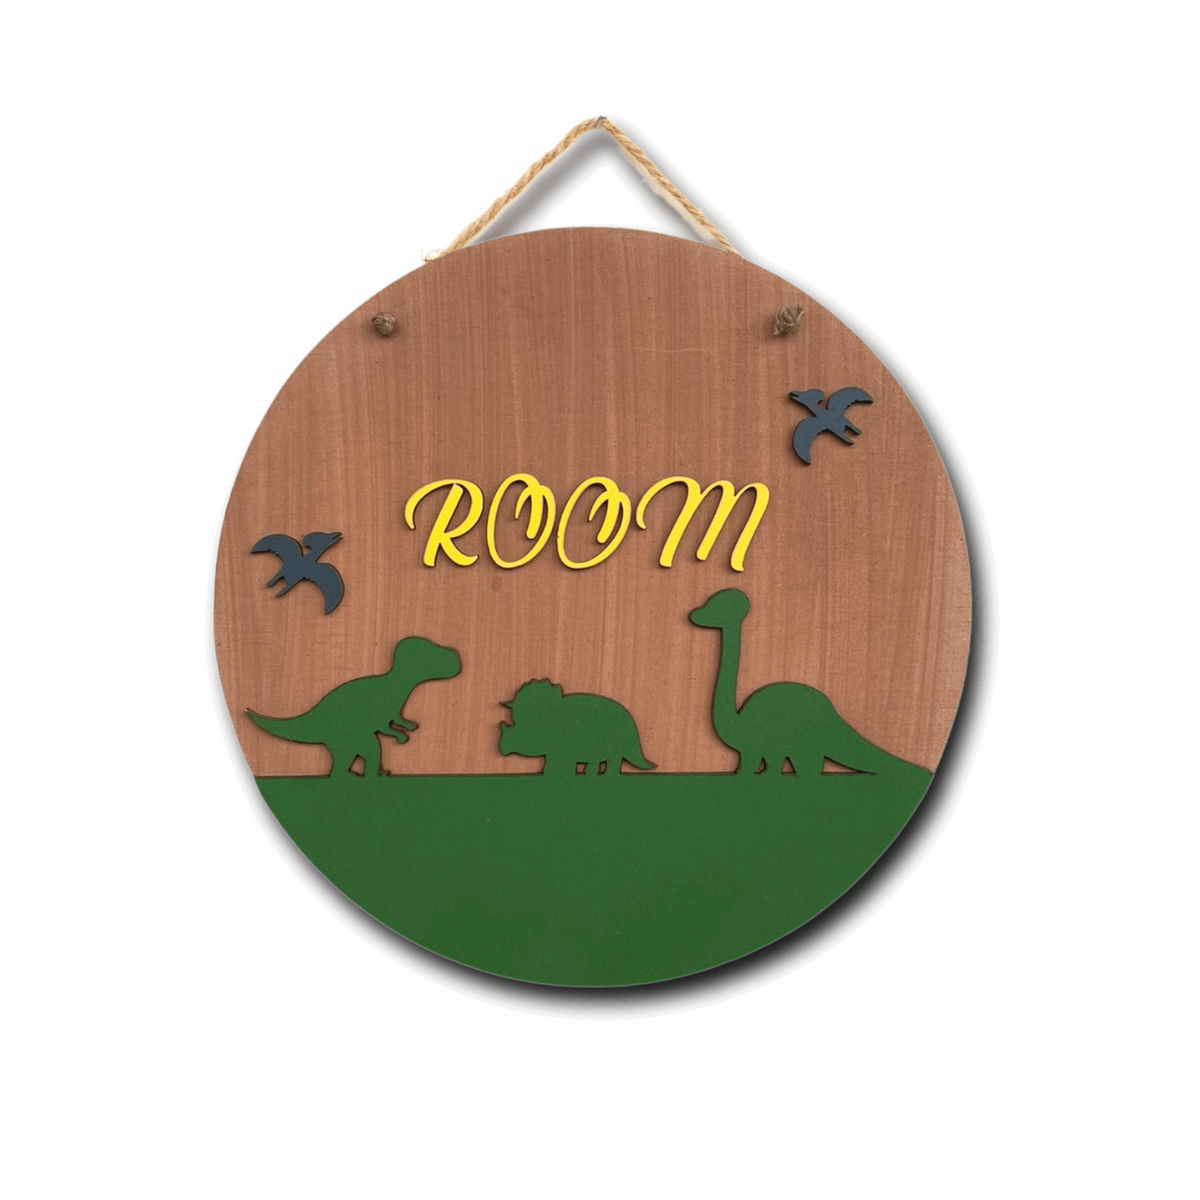 3D Wooden Hanging Sign Board For Kitchen, Kids Room, Café, and More Wemy Store